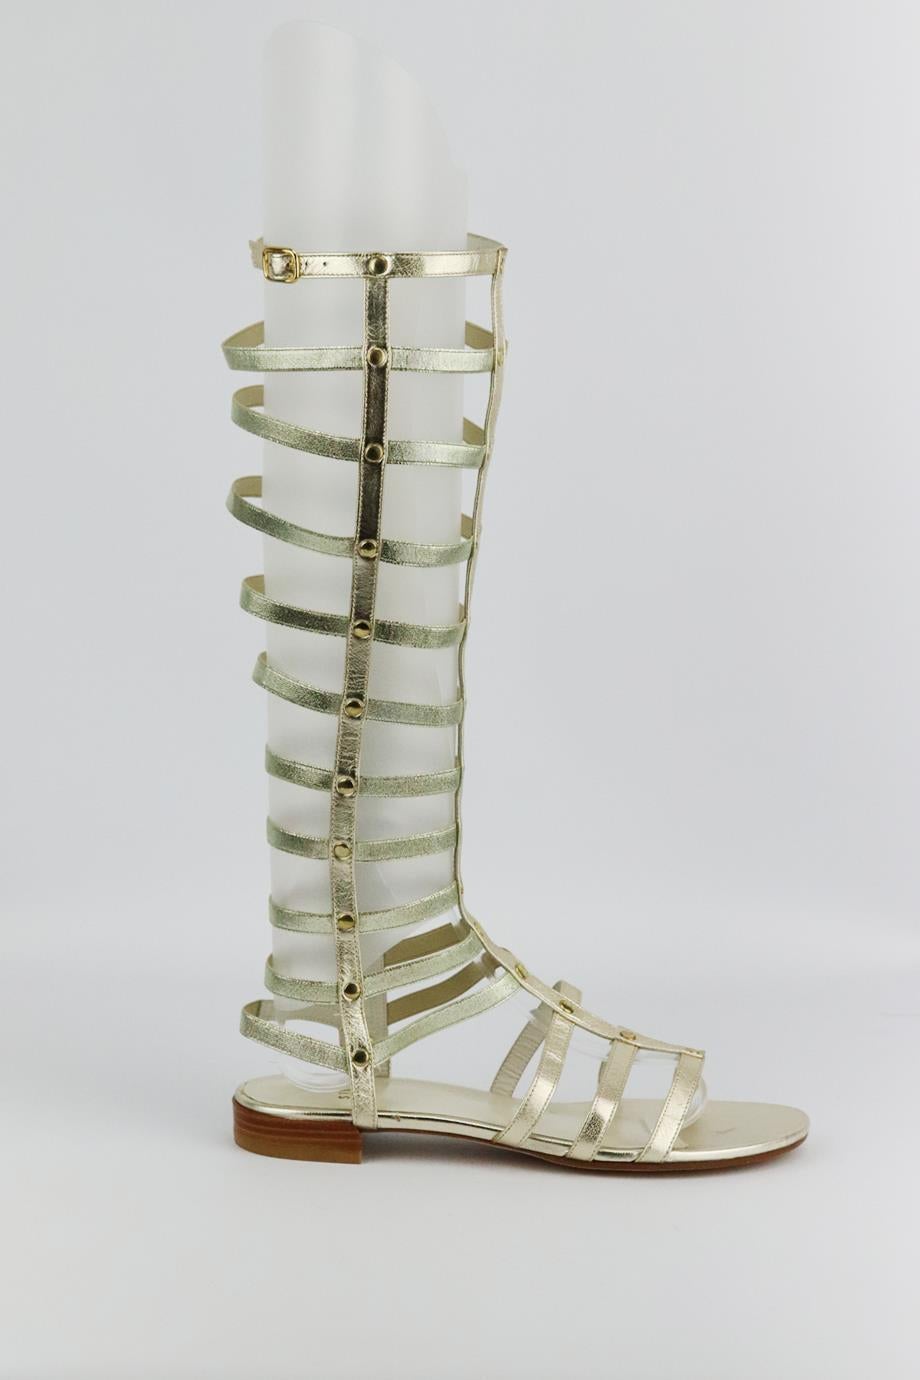 Stuart Weitzman metallic leather knee high sandals. Made from gold leather with gold-tone studded detail. Gold. Zip fastening at side. Does not come with box and dustbag. Size: EU 38 (UK 5, US 8). Shaft: 14.2 in. Insole: 9.8 in. Heel: 0.8 in
